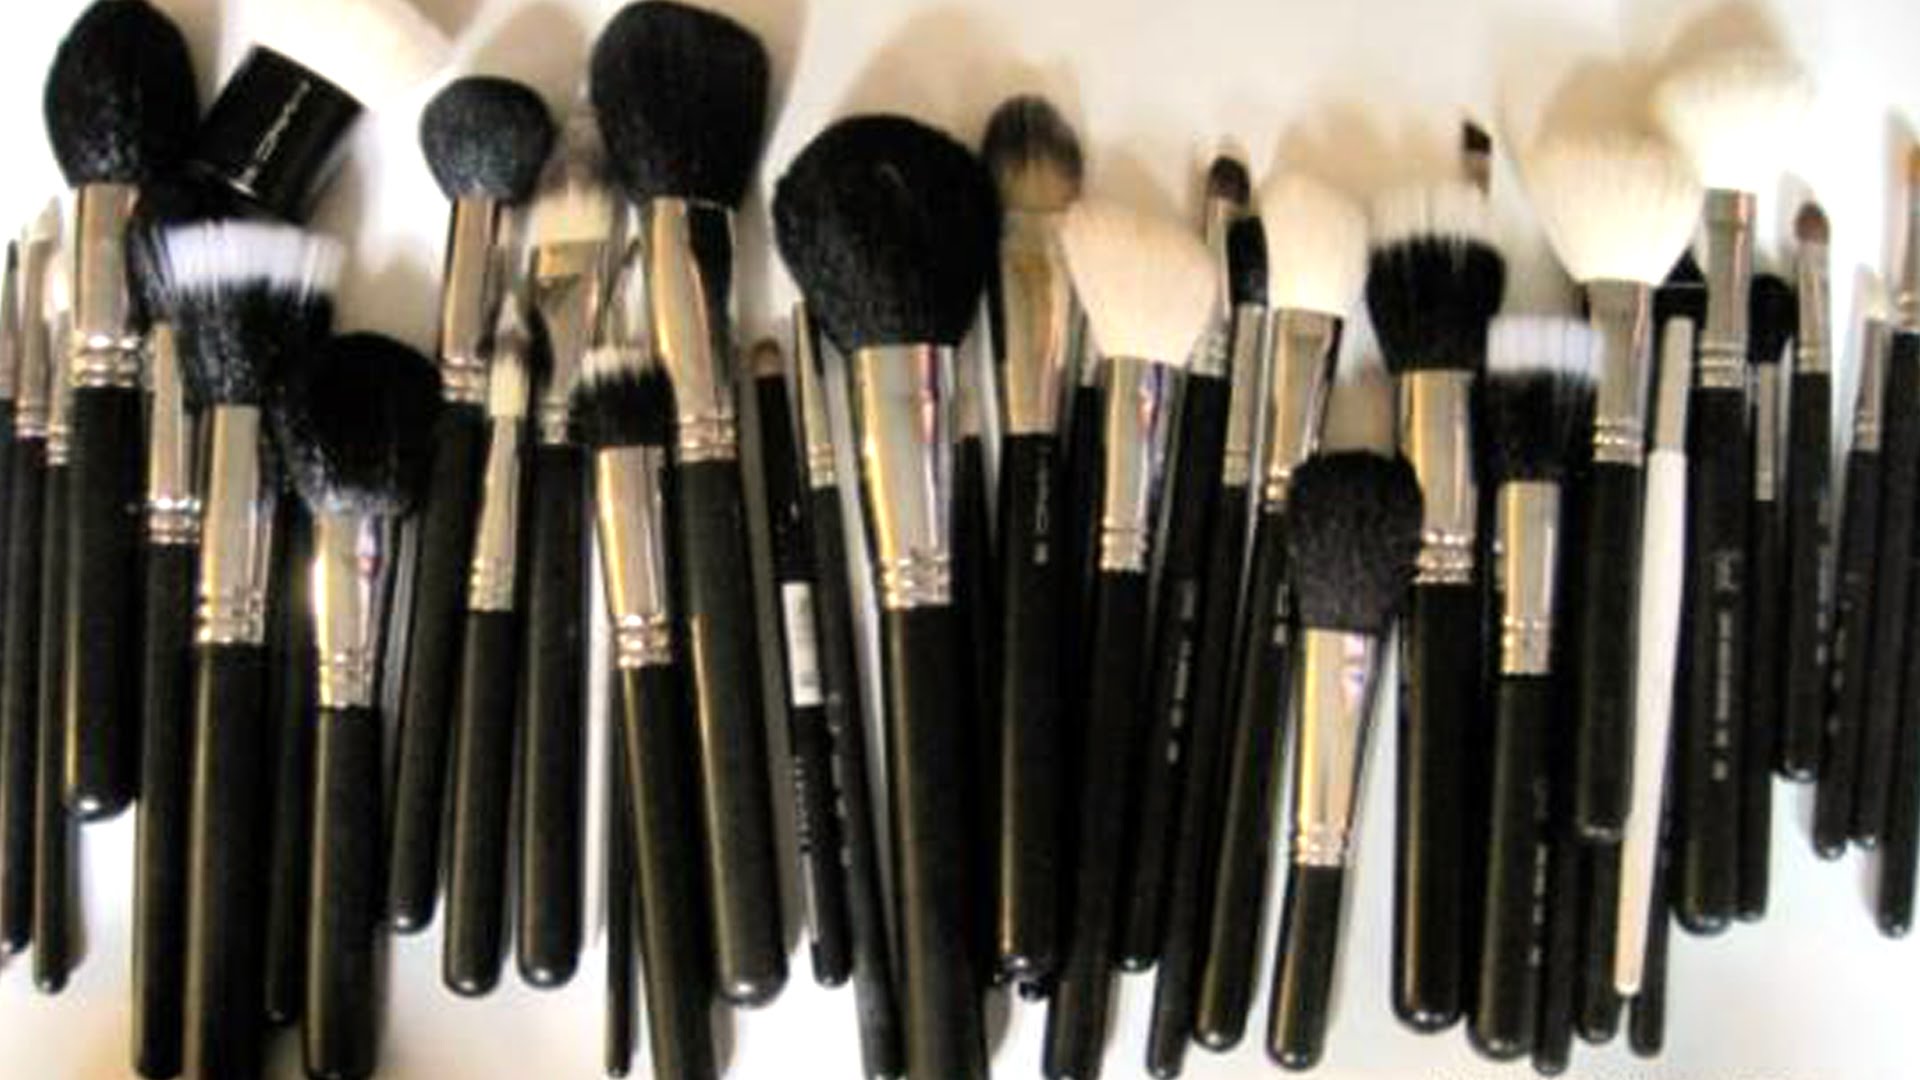 HOW TO CLEAN MAKEUP BRUSHES | BEAUTY BLENDERS - YouTube